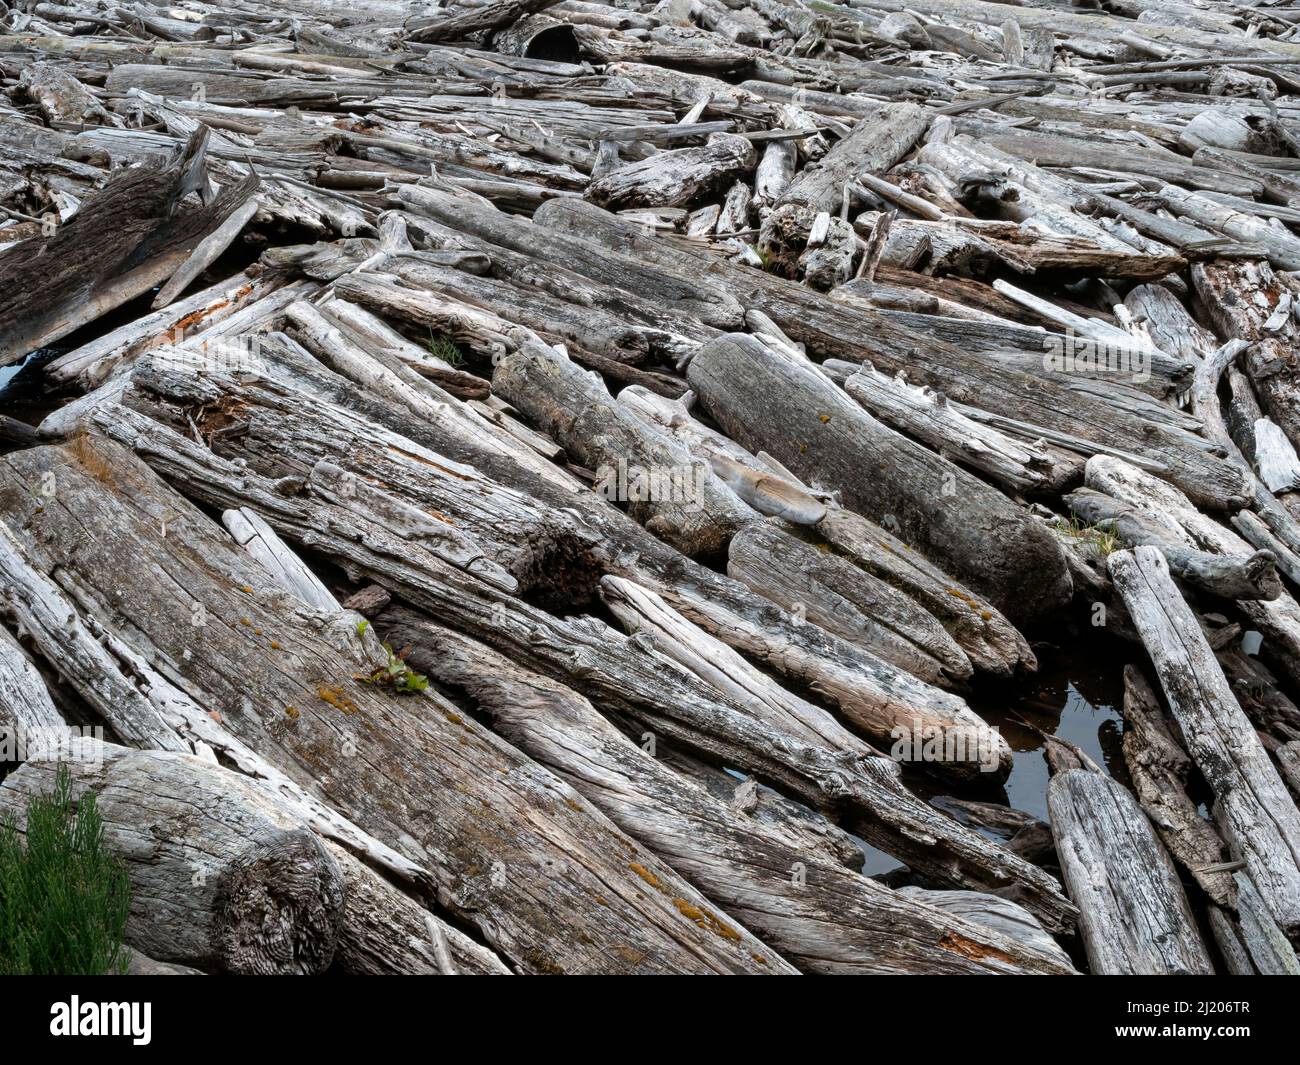 WA21179-00...WASHINGTON - Drift logs in a salt-chuck lagoon  located between the two arms of Spencer Spit in Spencer Spit State Park on Orcas Island. Stock Photo